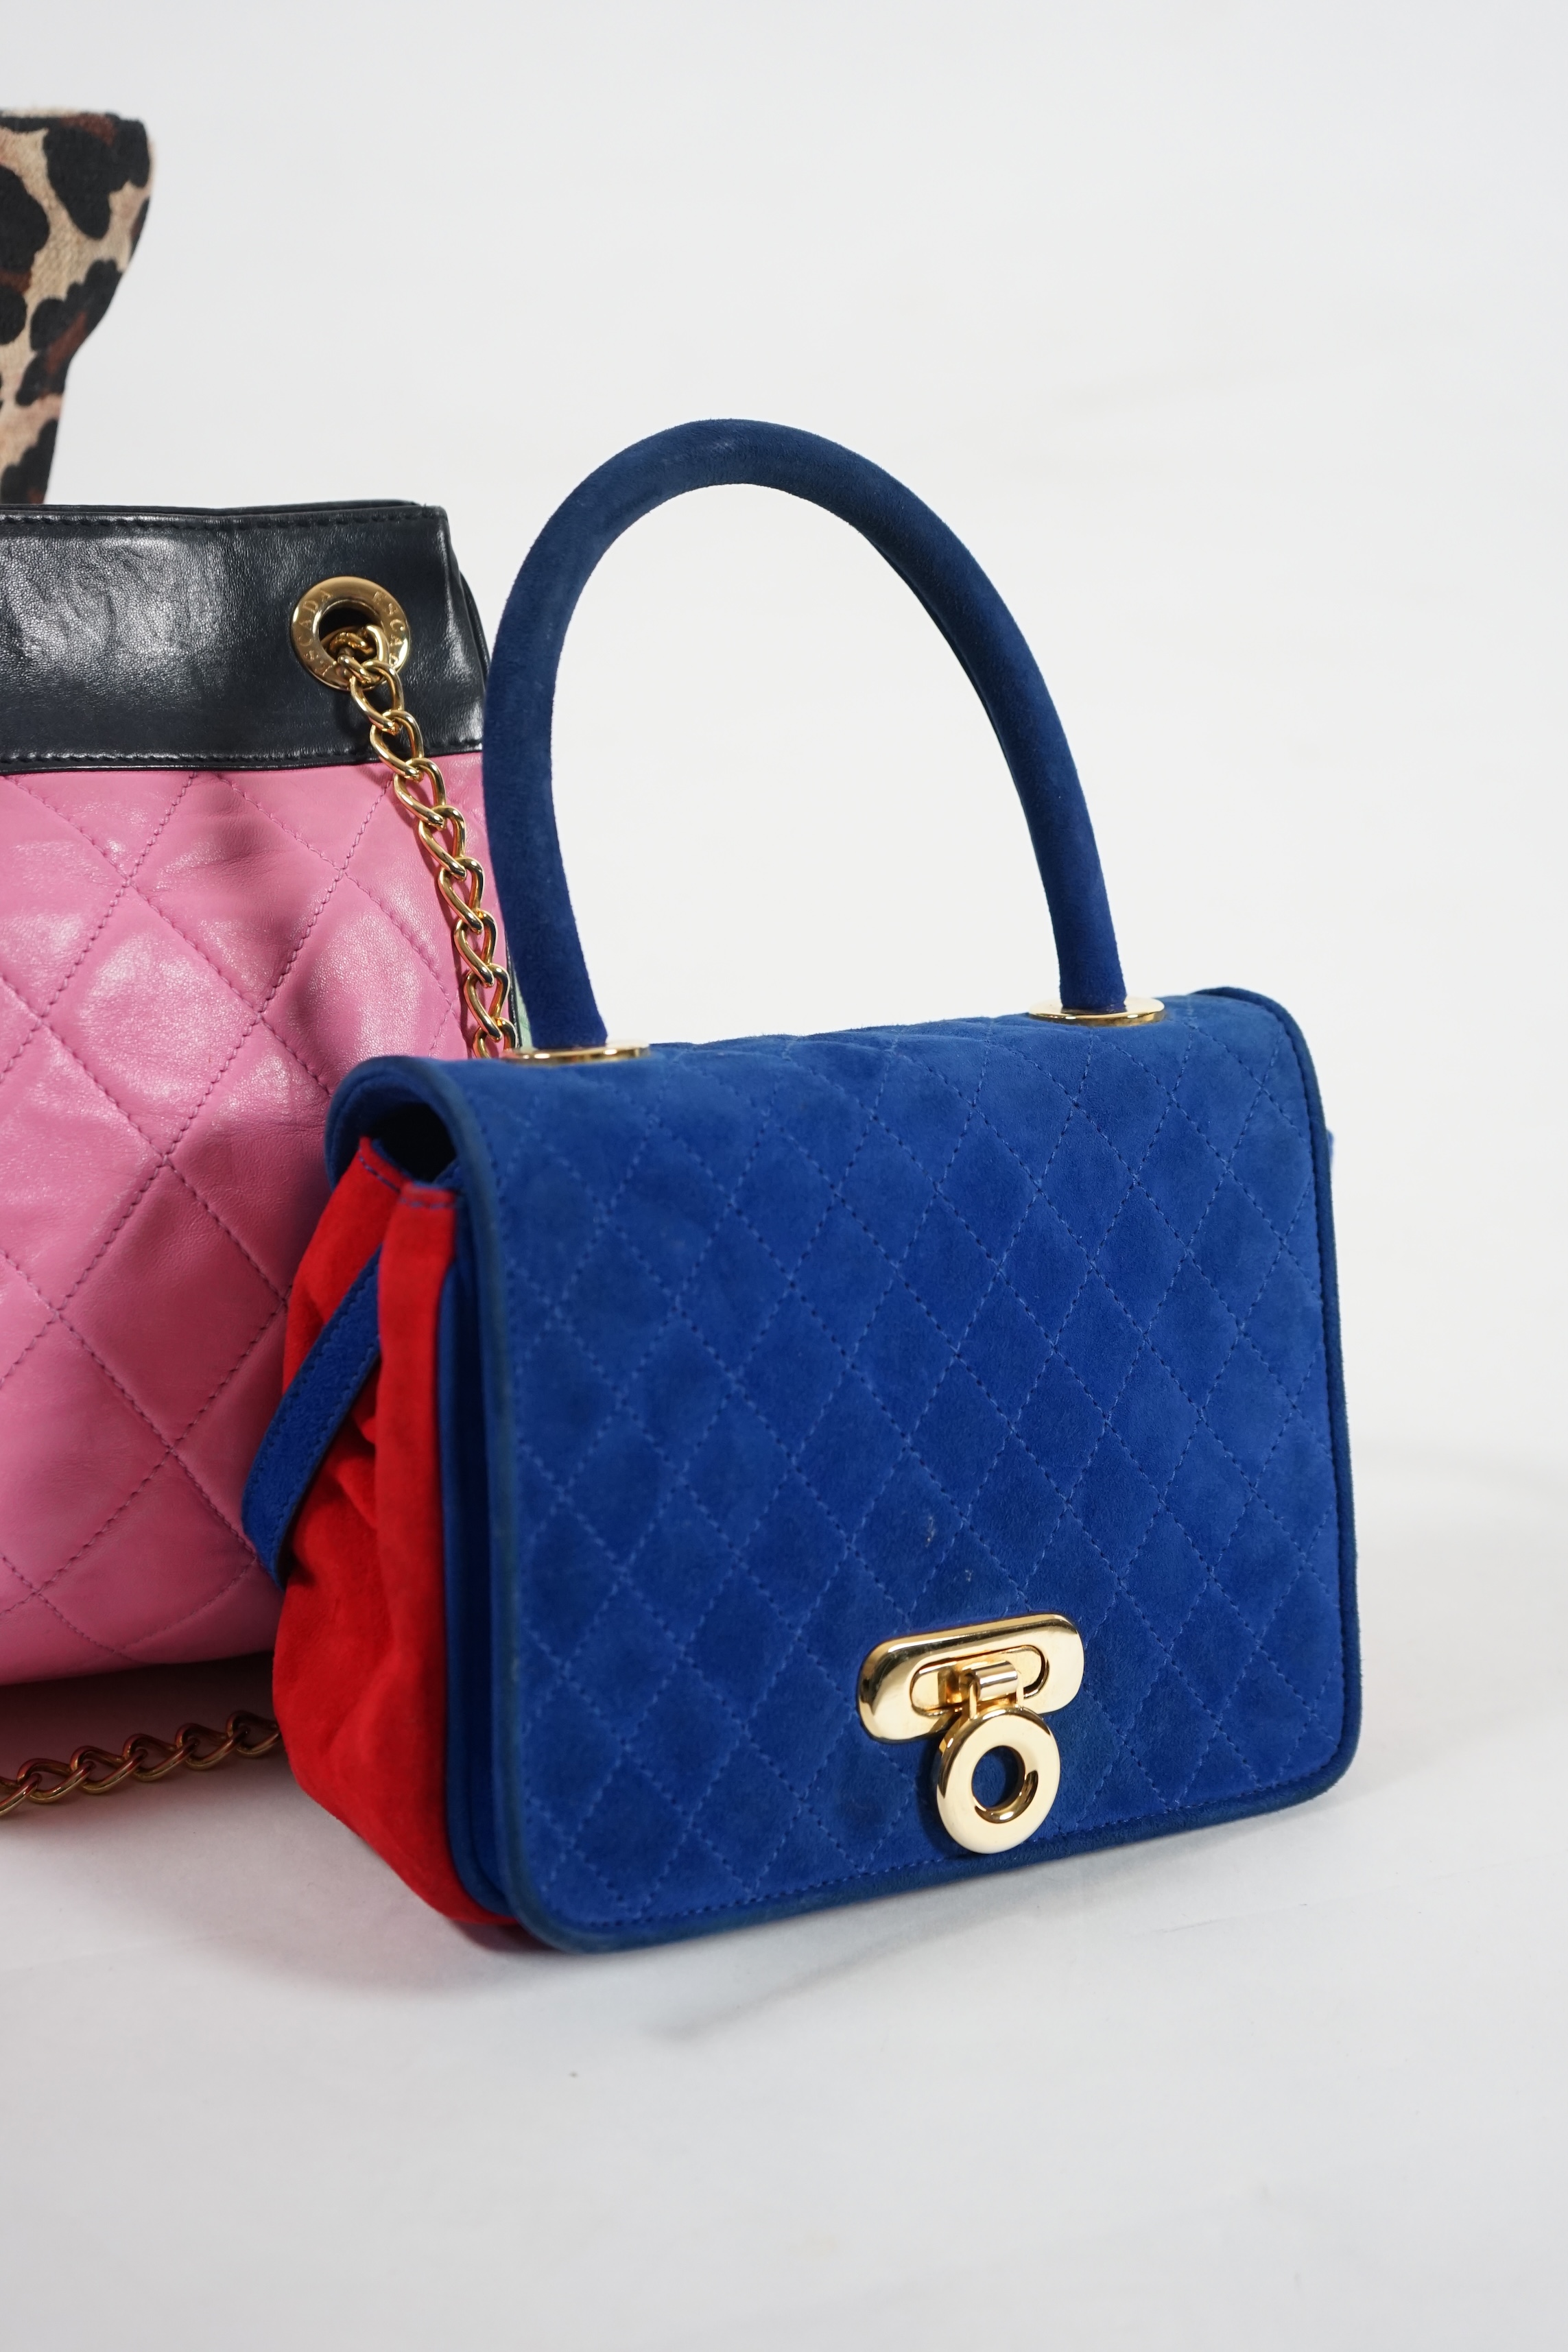 A selection of lady's handbags, including an animal print Stuart Weitzman shoulder bag with dust bag, an Escada suede royal blue and red shoulder bag, and another Escada handbag in navy blue with pink and light green qui